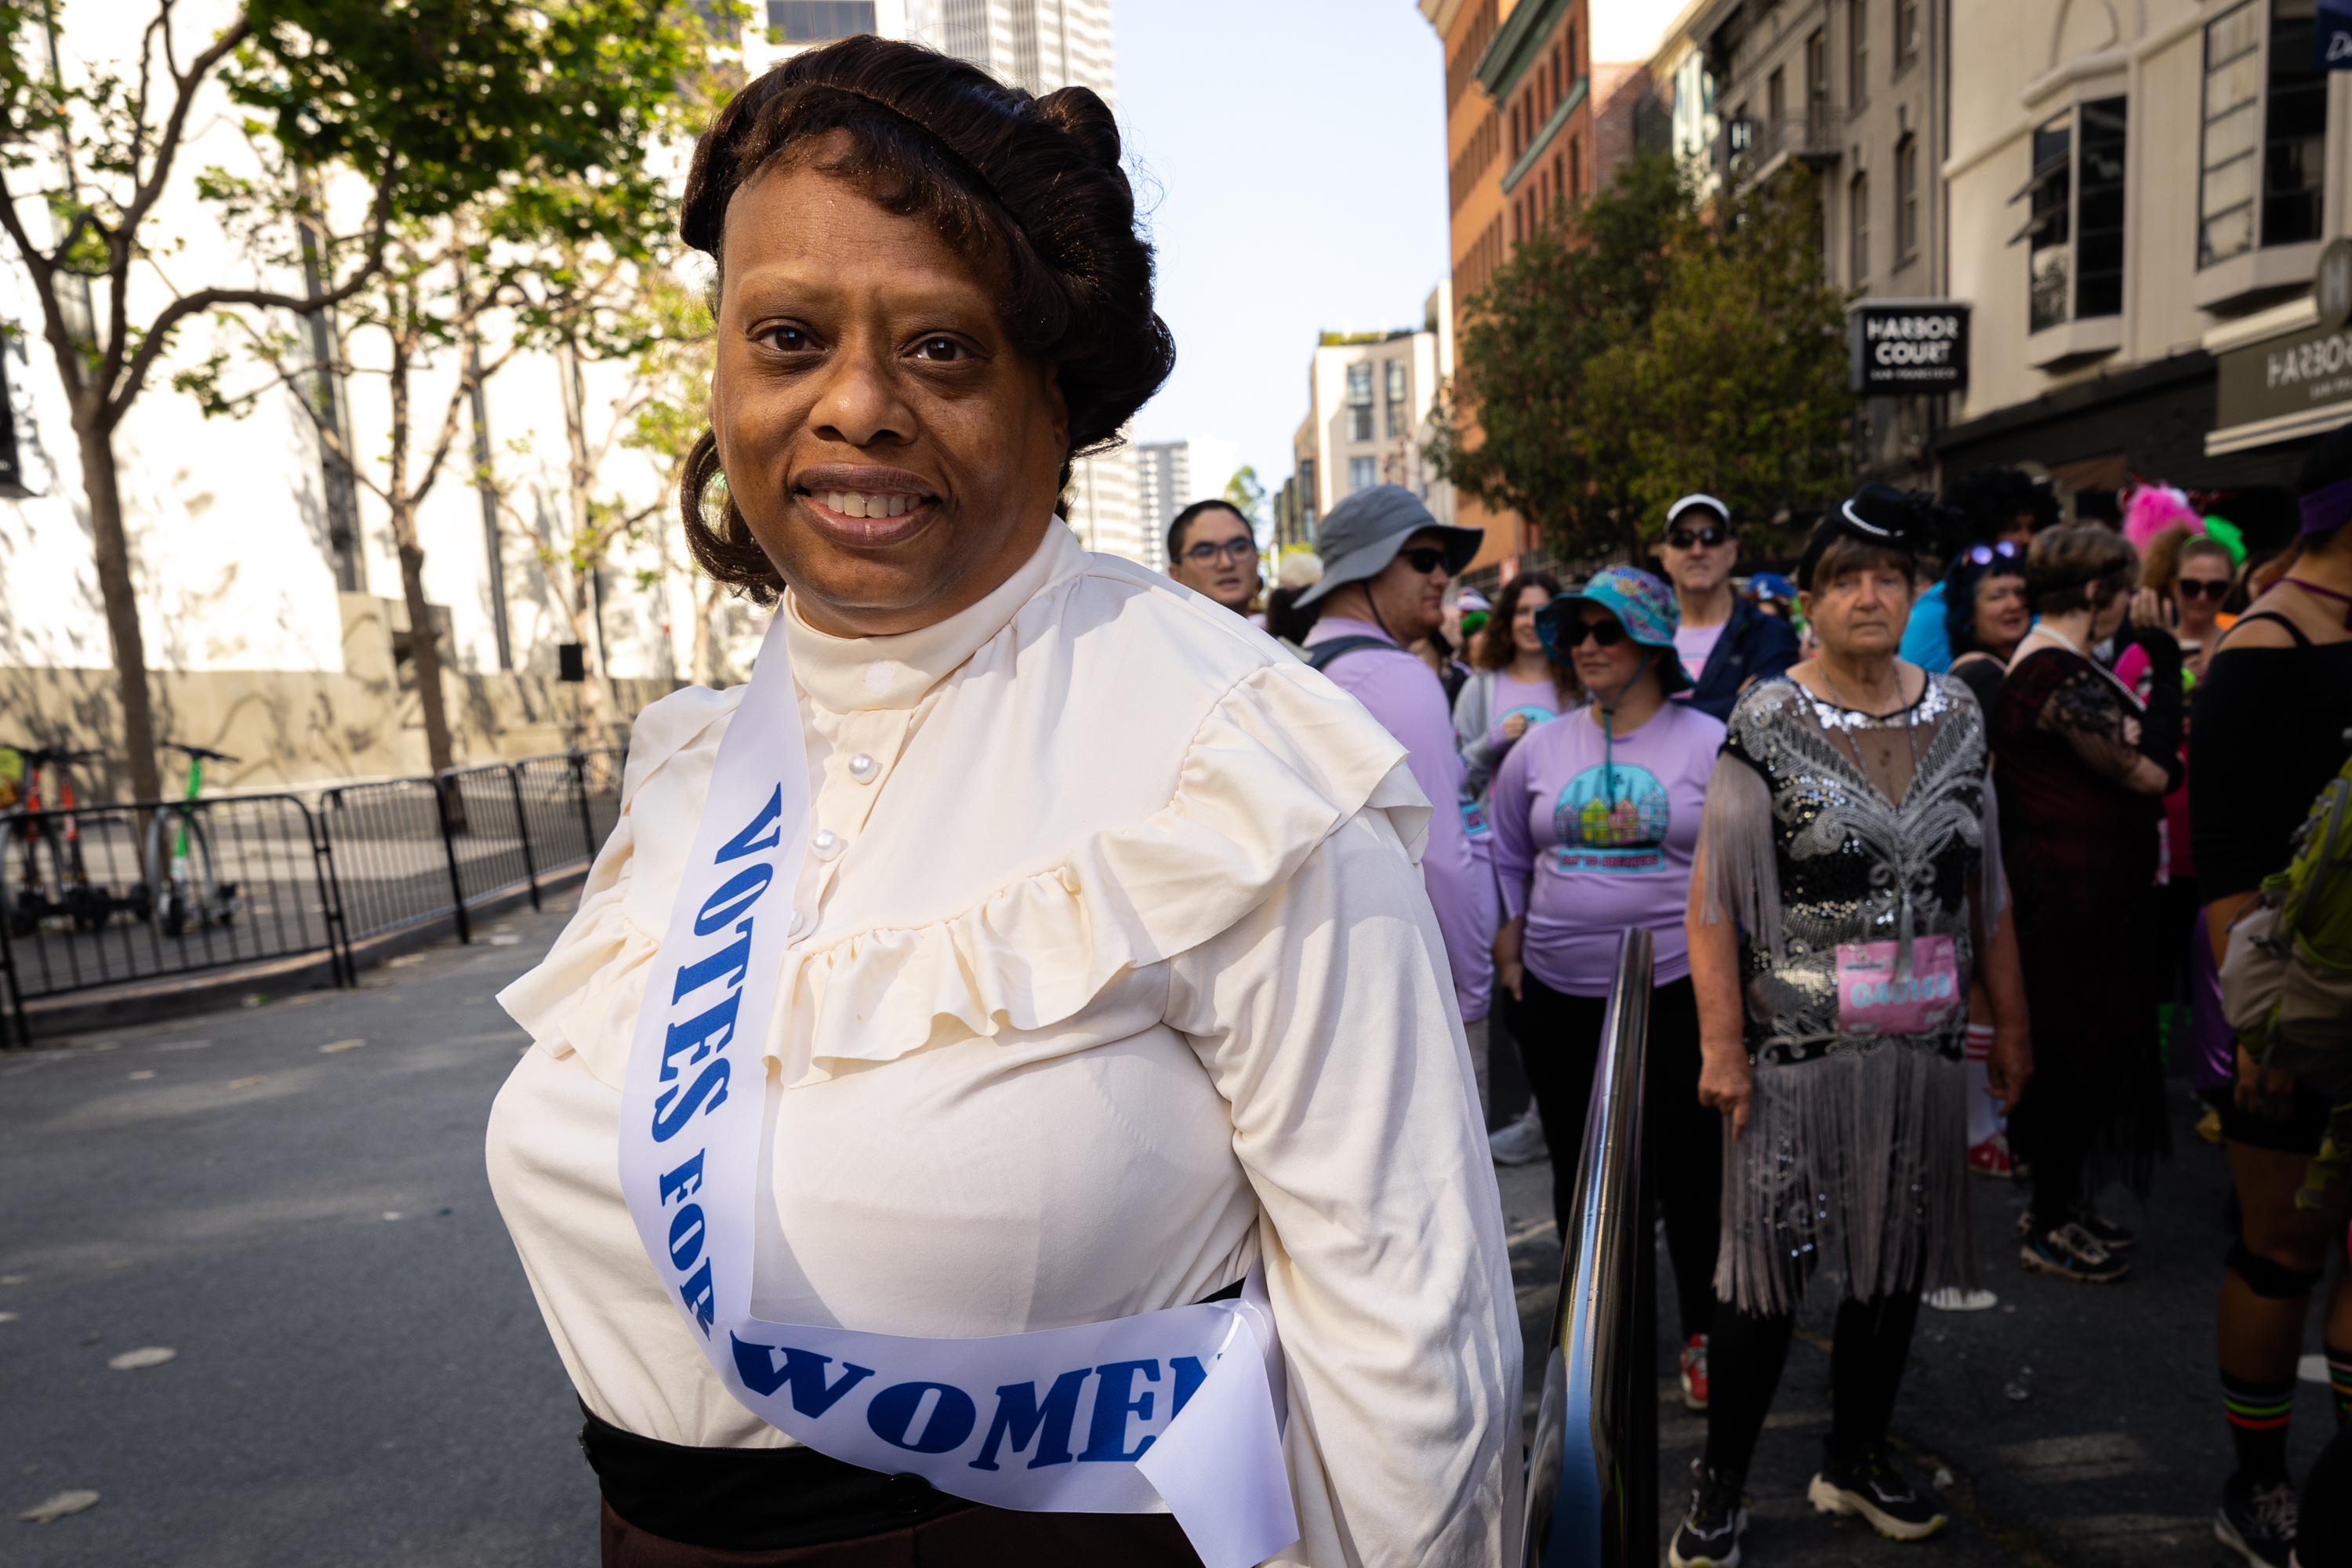 A woman in a historical white blouse and brown skirt stands in a crowd, wearing a sash that reads 'Votes for Women', smiling at the camera.